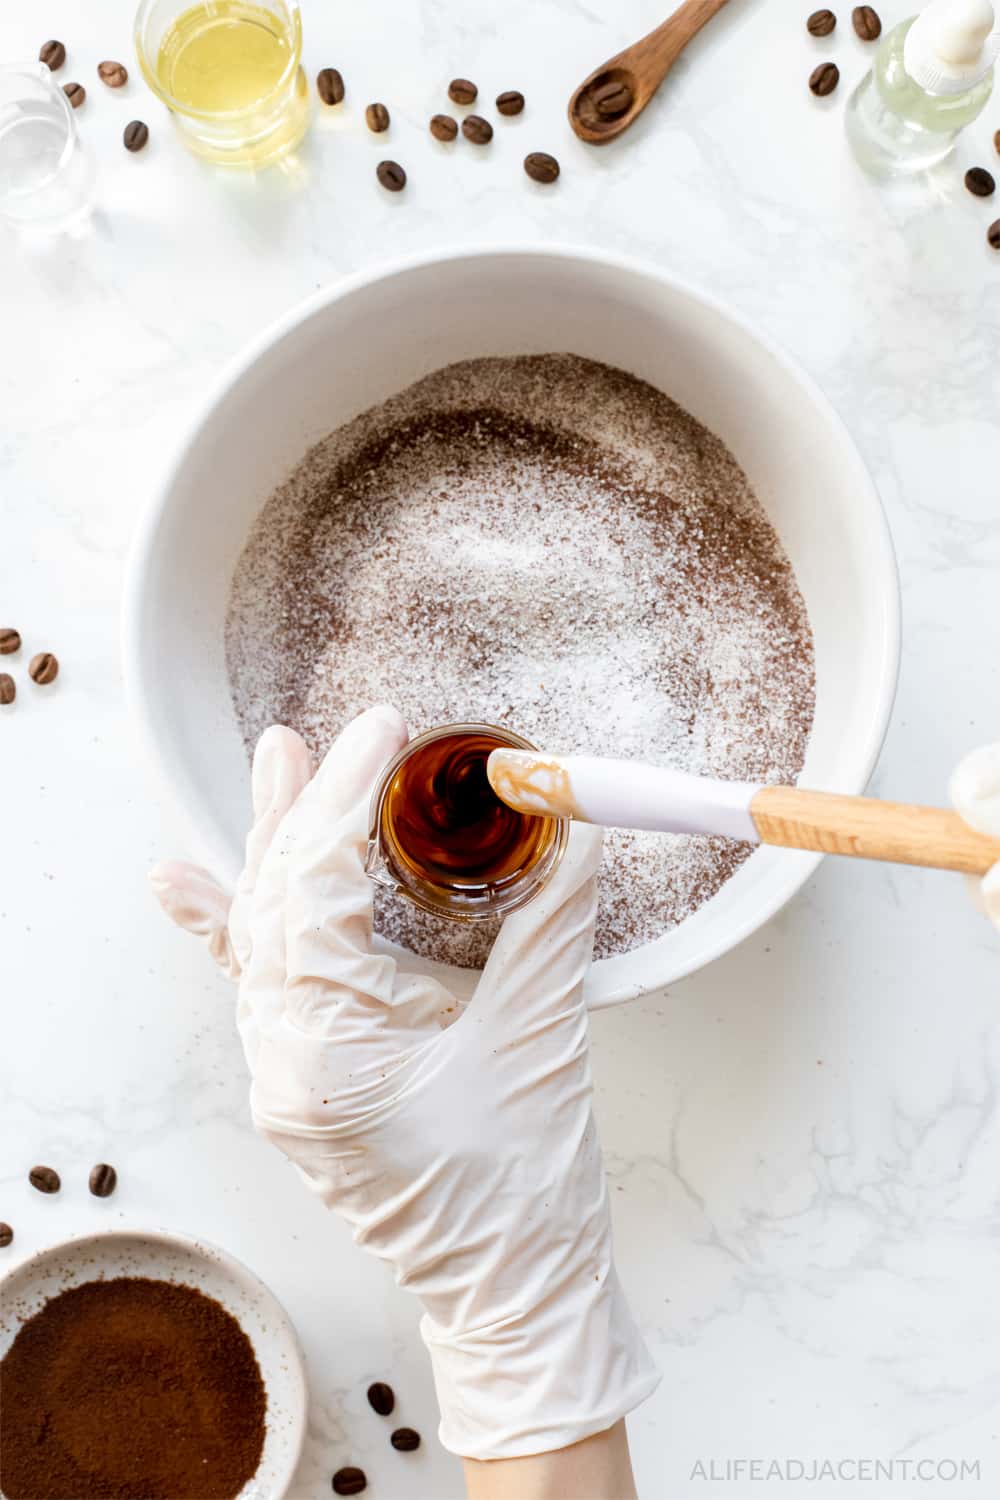 Combining bath bomb emulsifier, coconut oil and coffee essential oil for DIY bath bombs.